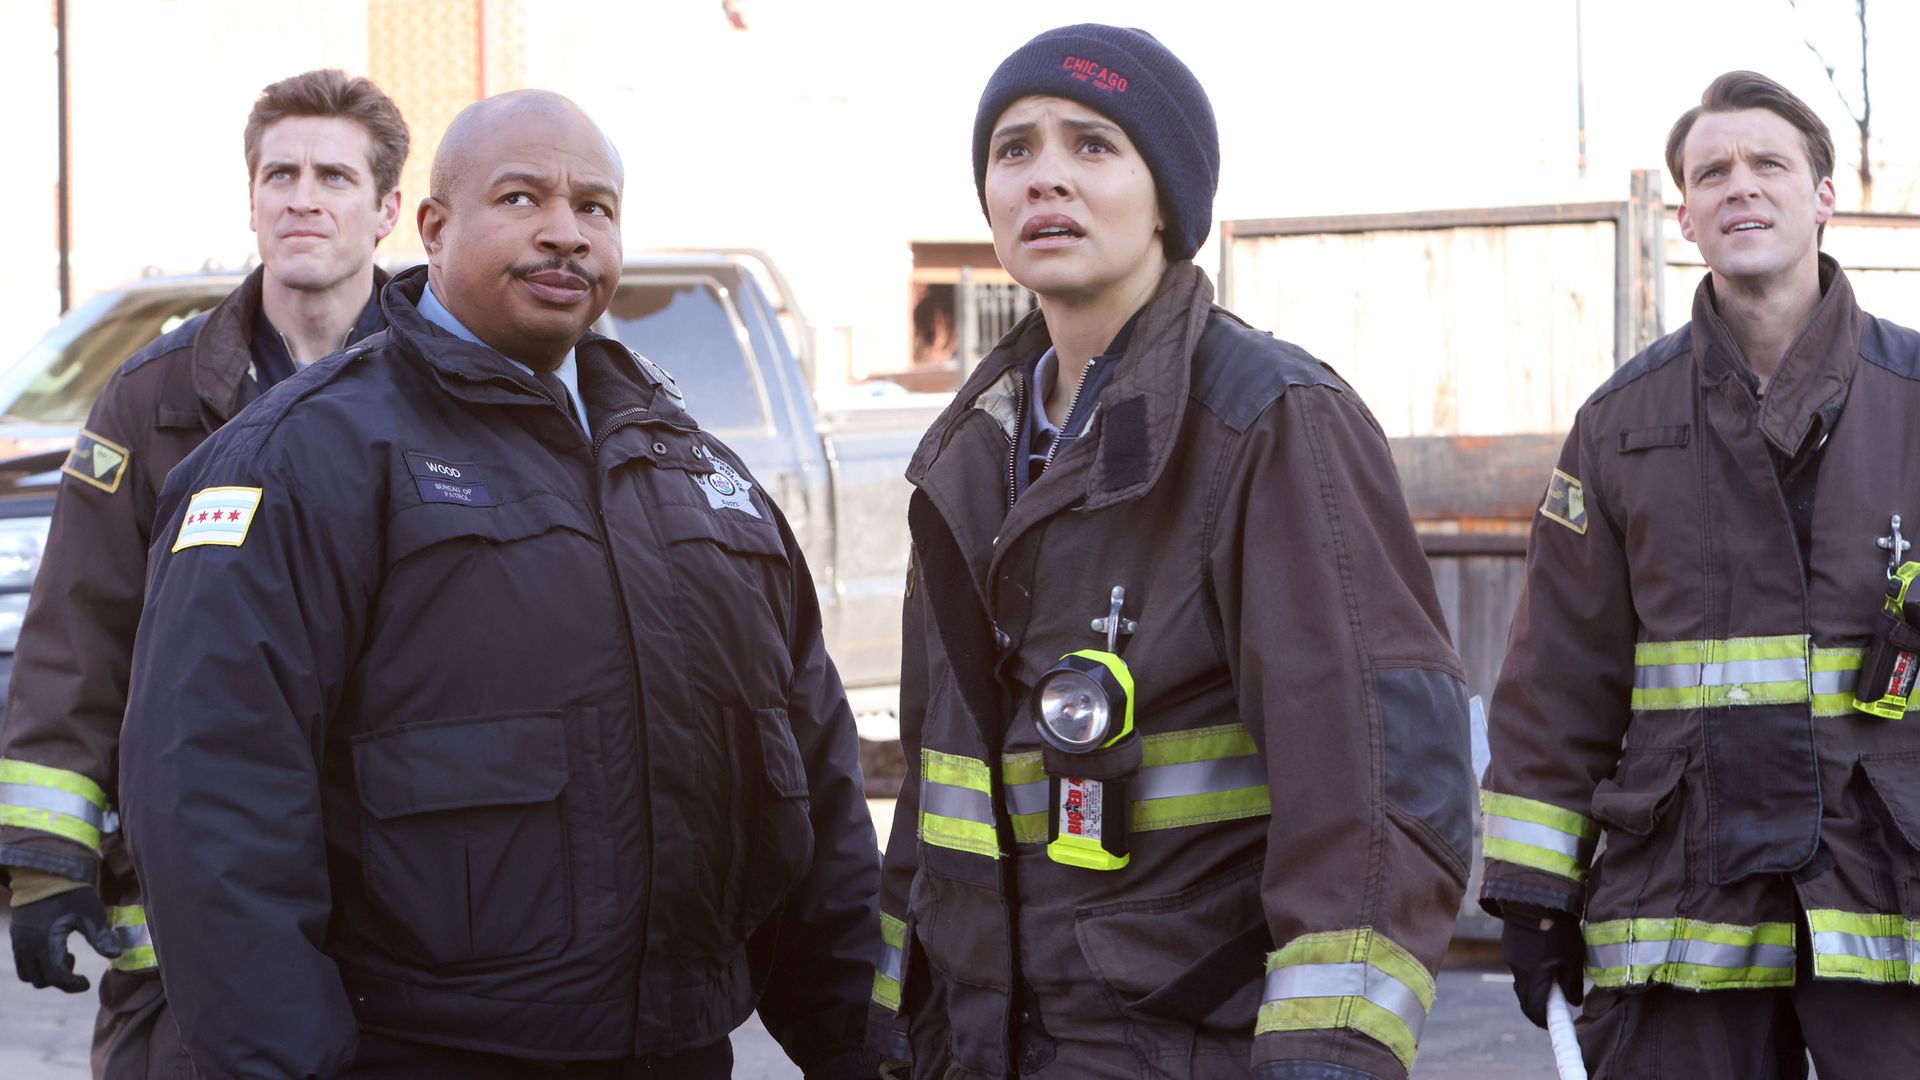 Episode 18 of Chicago Fire